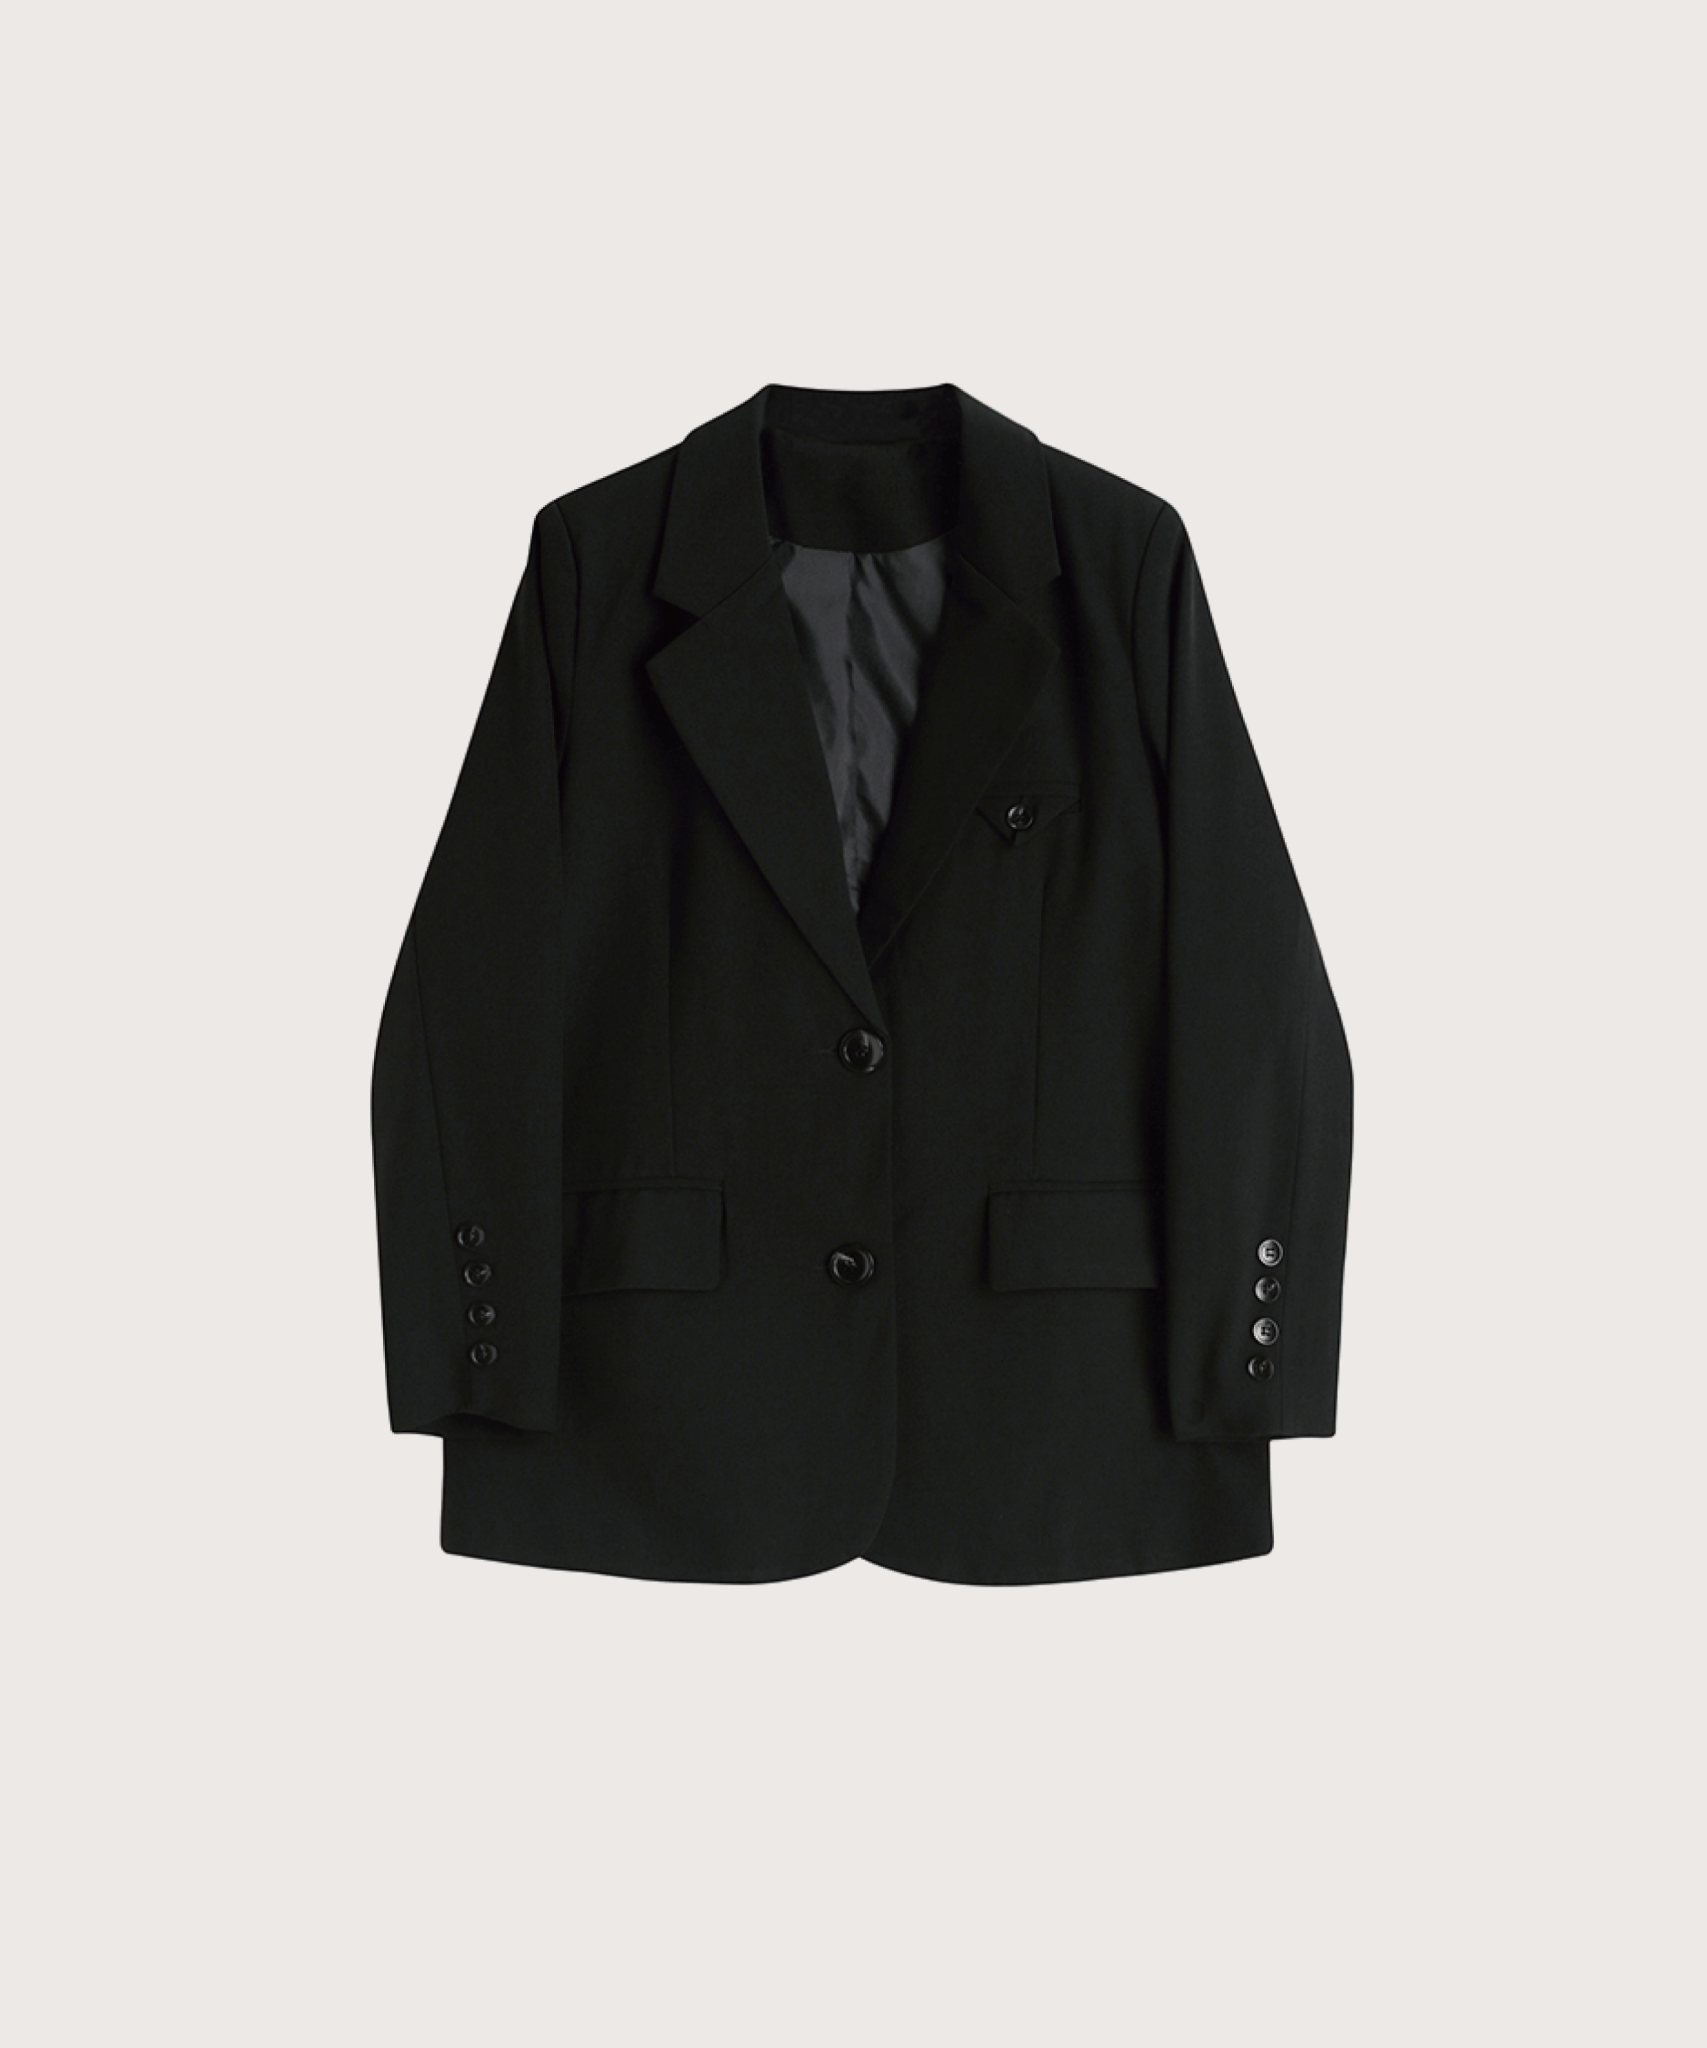 Relaxed Suit Jacket リラックススーツジャケット - LOVE POMME POMME